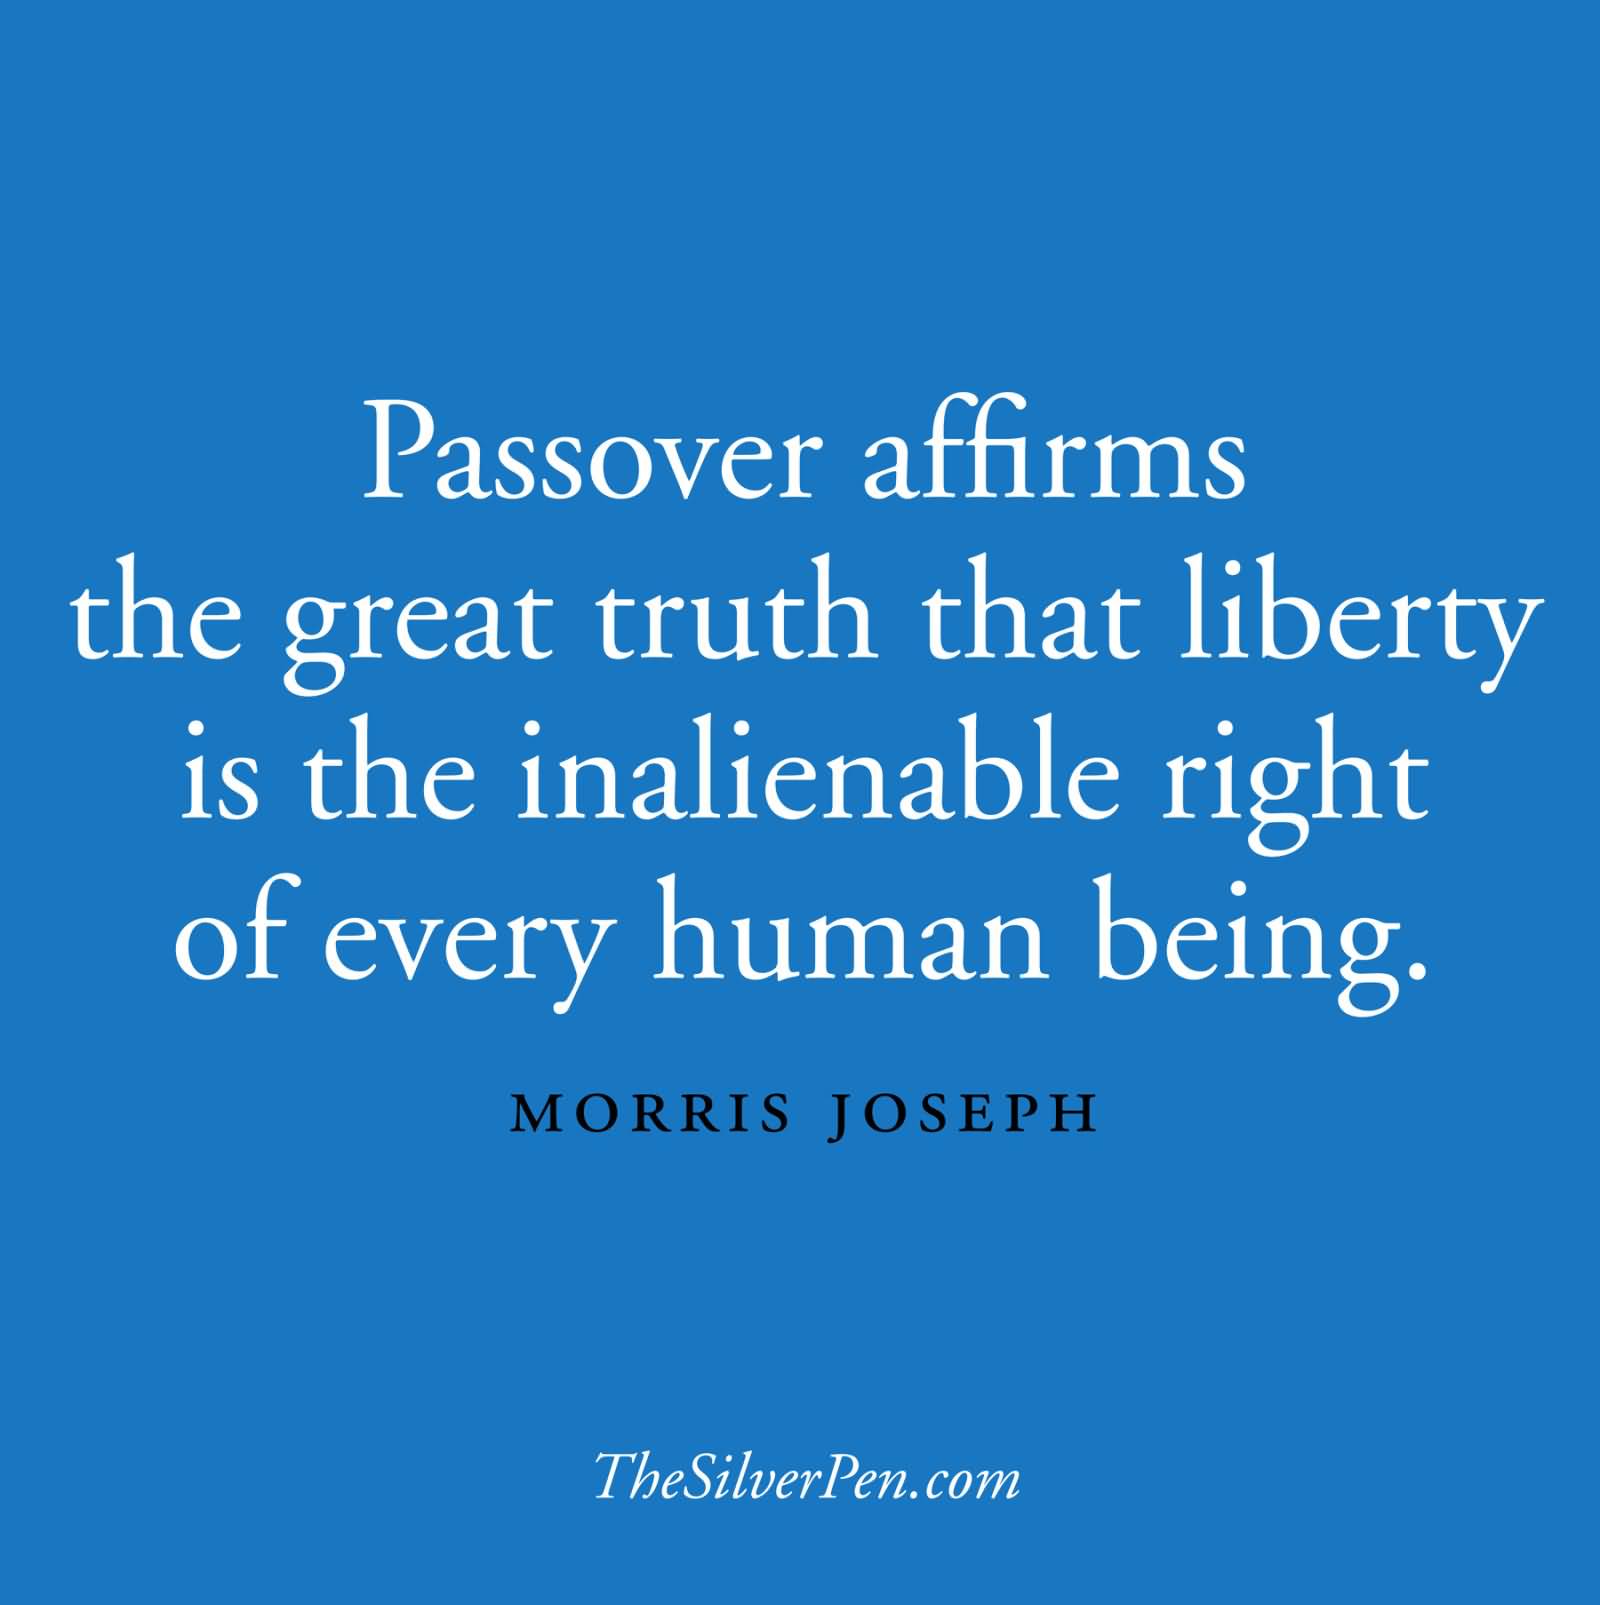 Passover Affirms The Great Truth That Liberty Is The Inalienable Right Of Every Human Being.